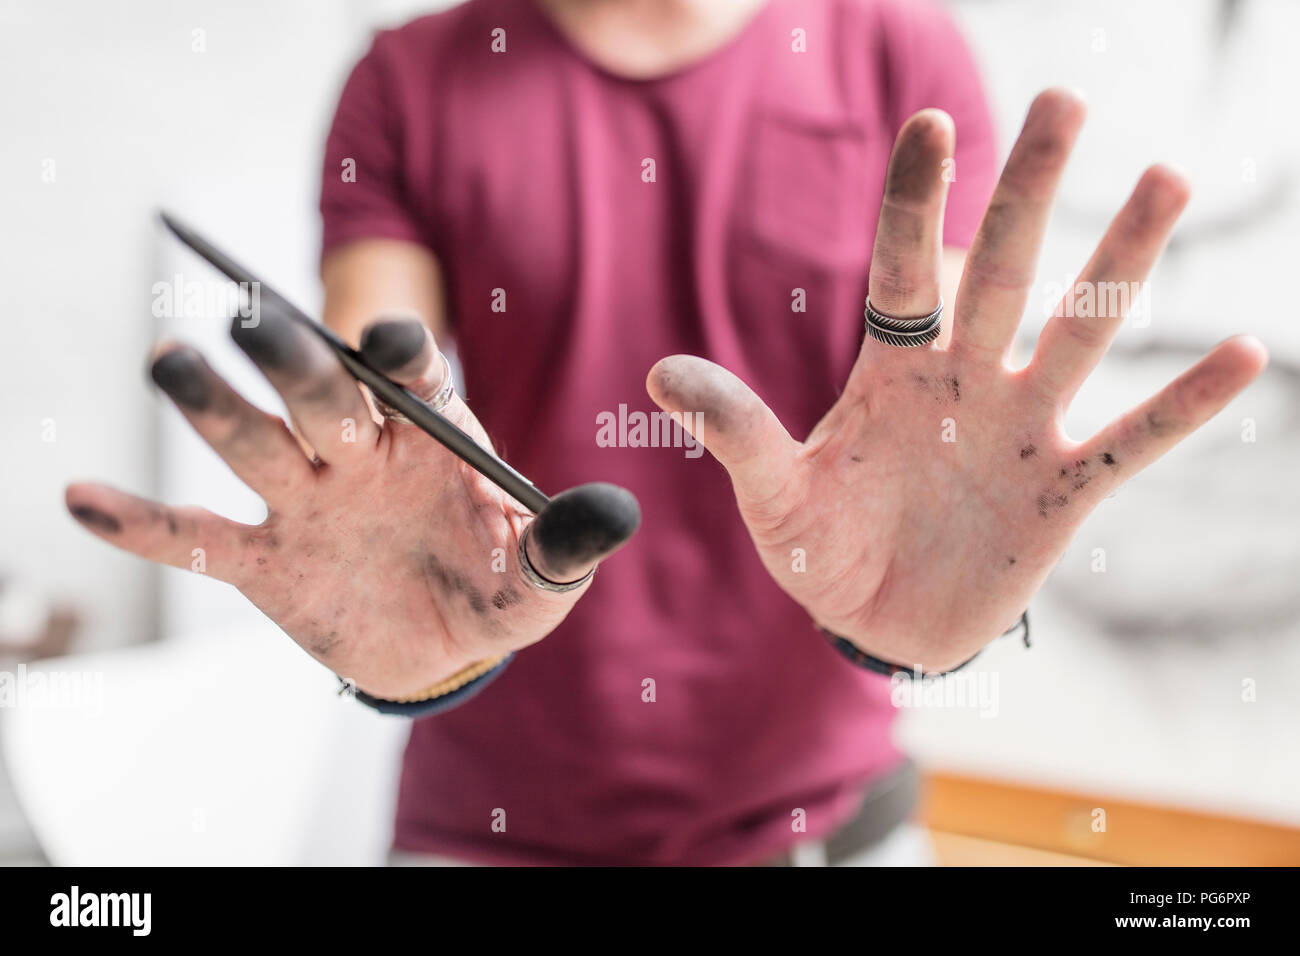 Artist showing his dirty hands Stock Photo